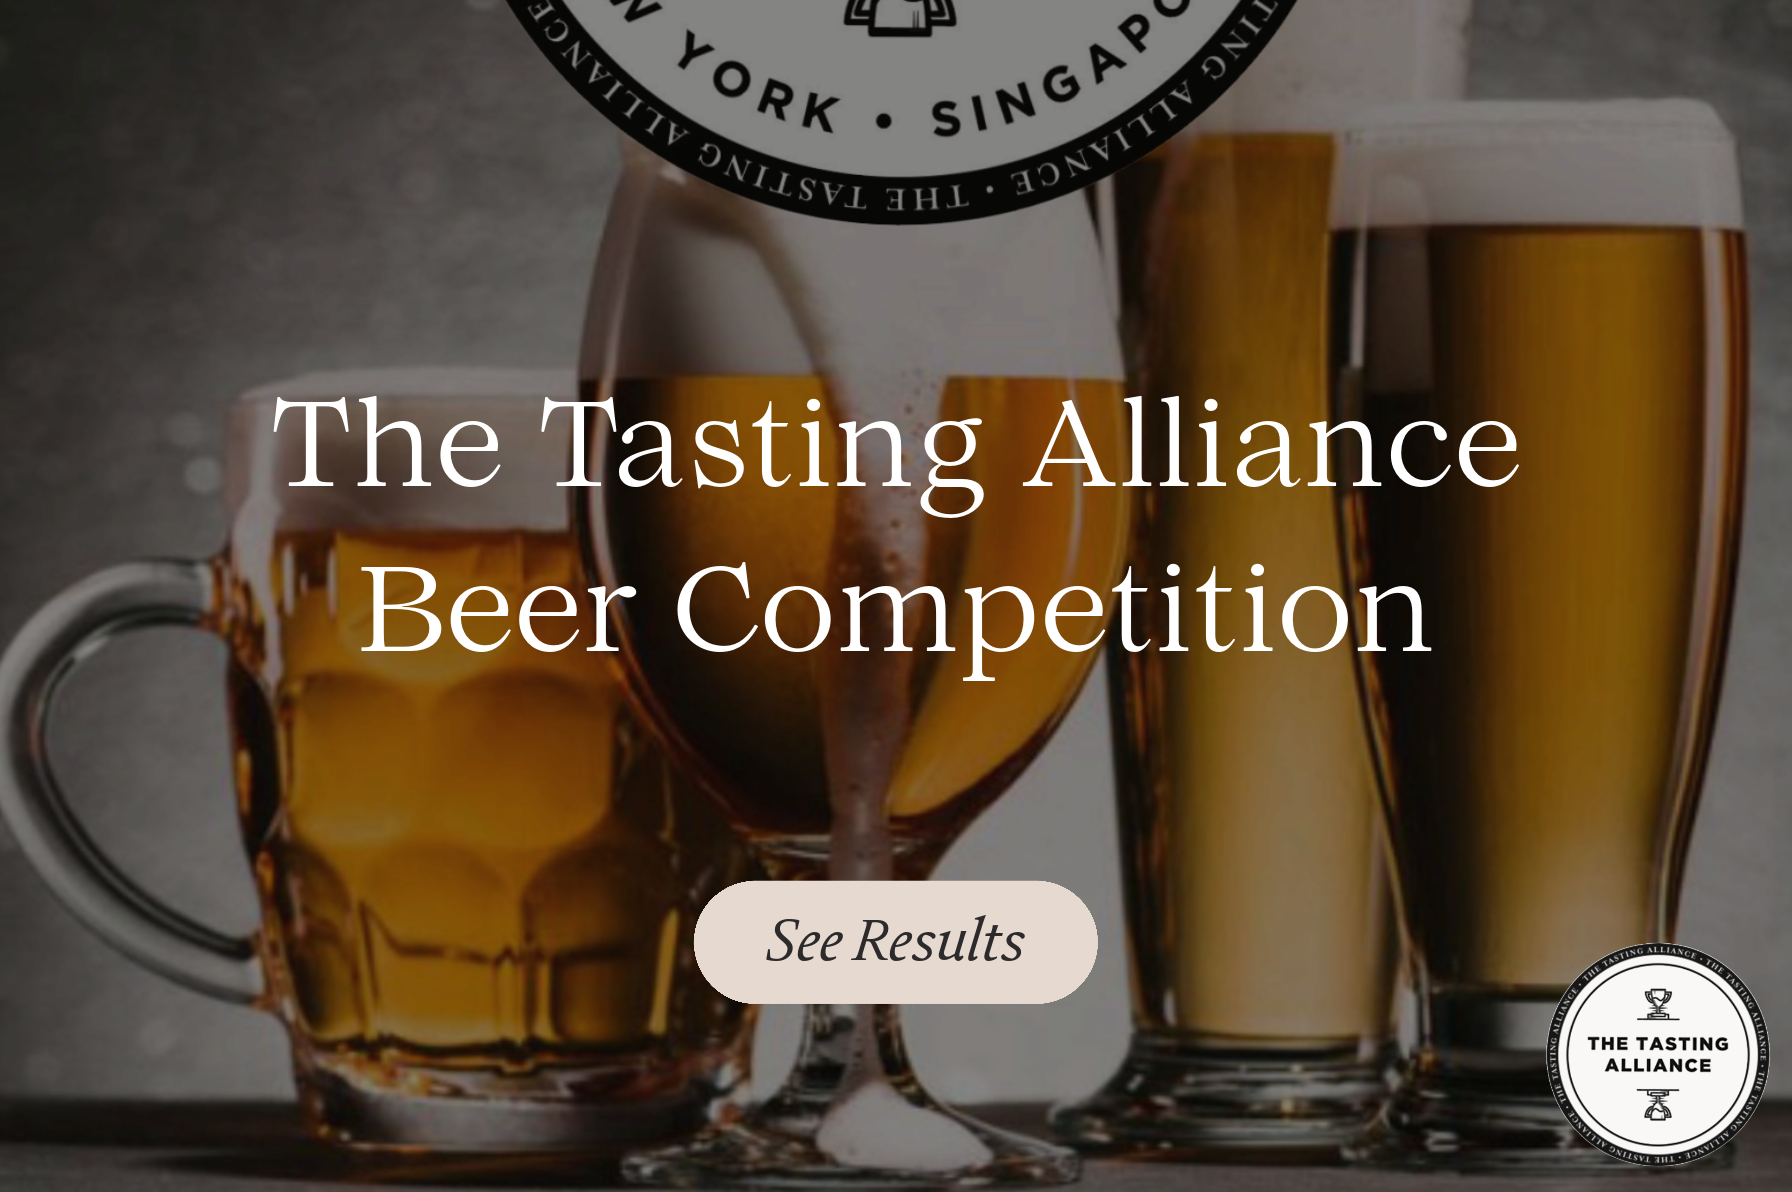 The results from The Tasting Alliance Beer Competition